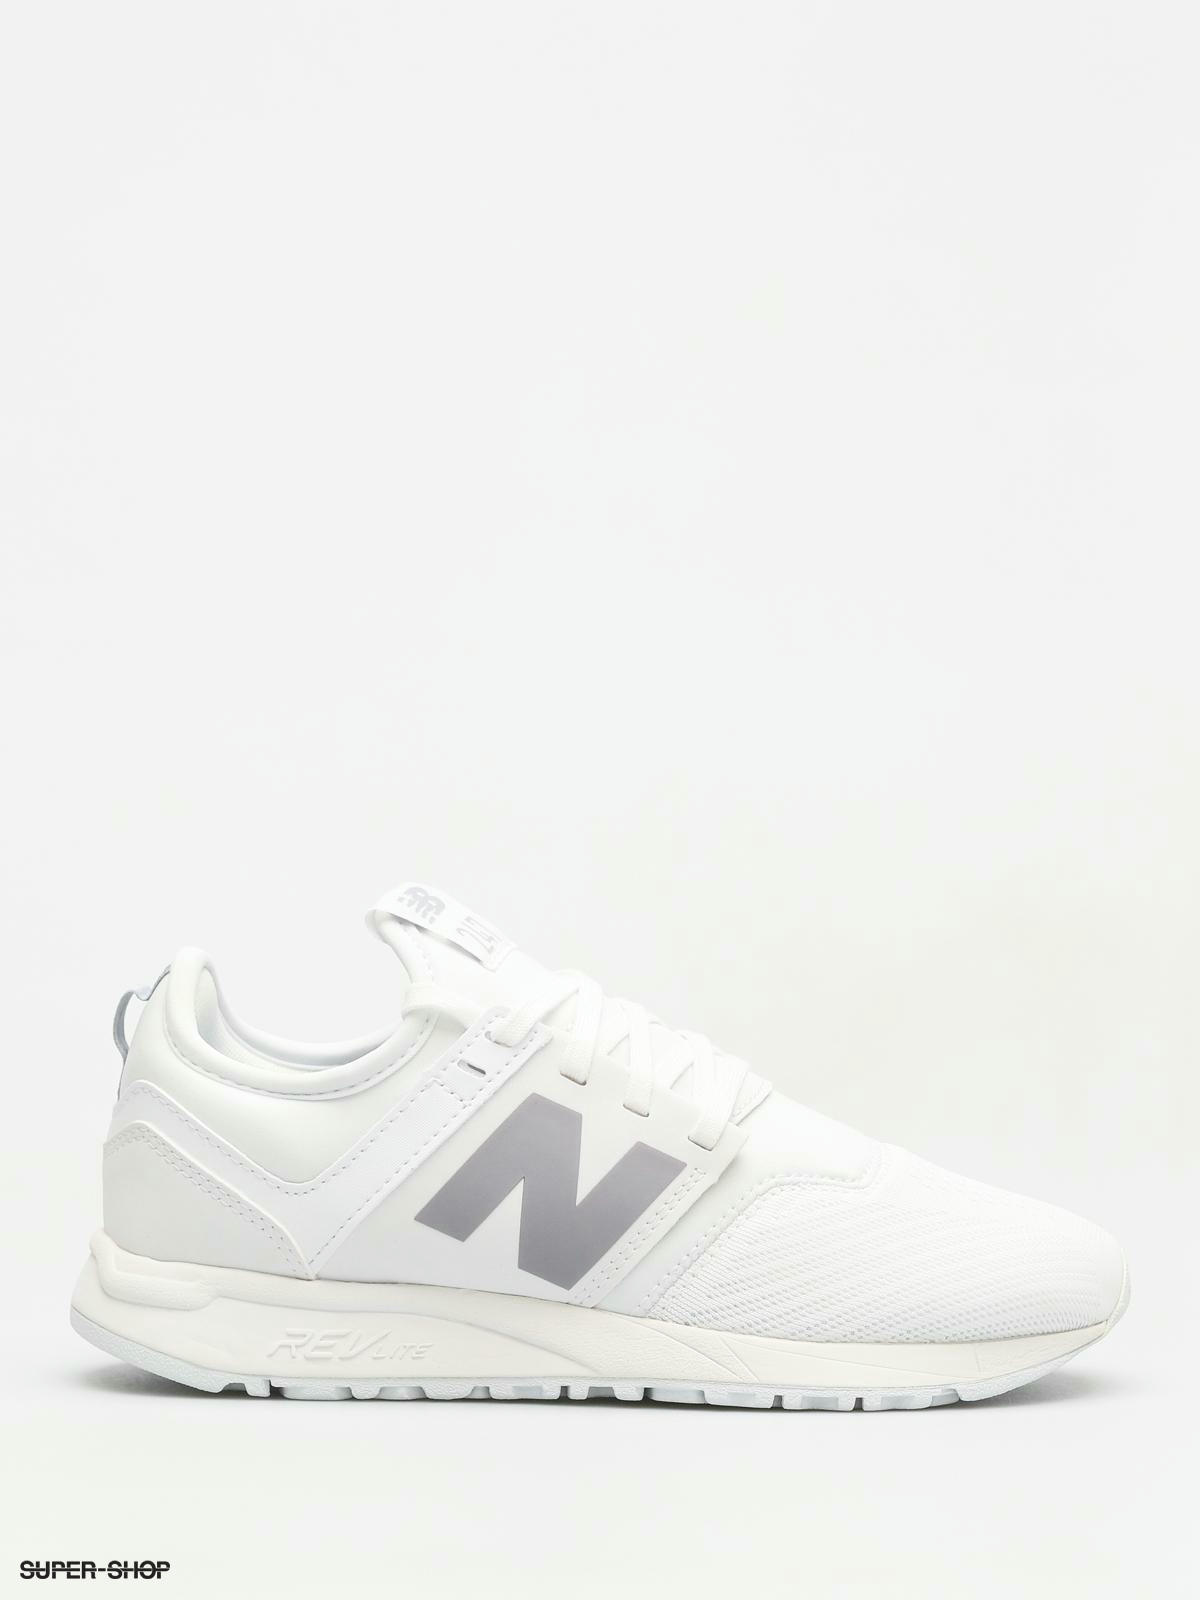 New Balance Shoes 247 Wmn (white)